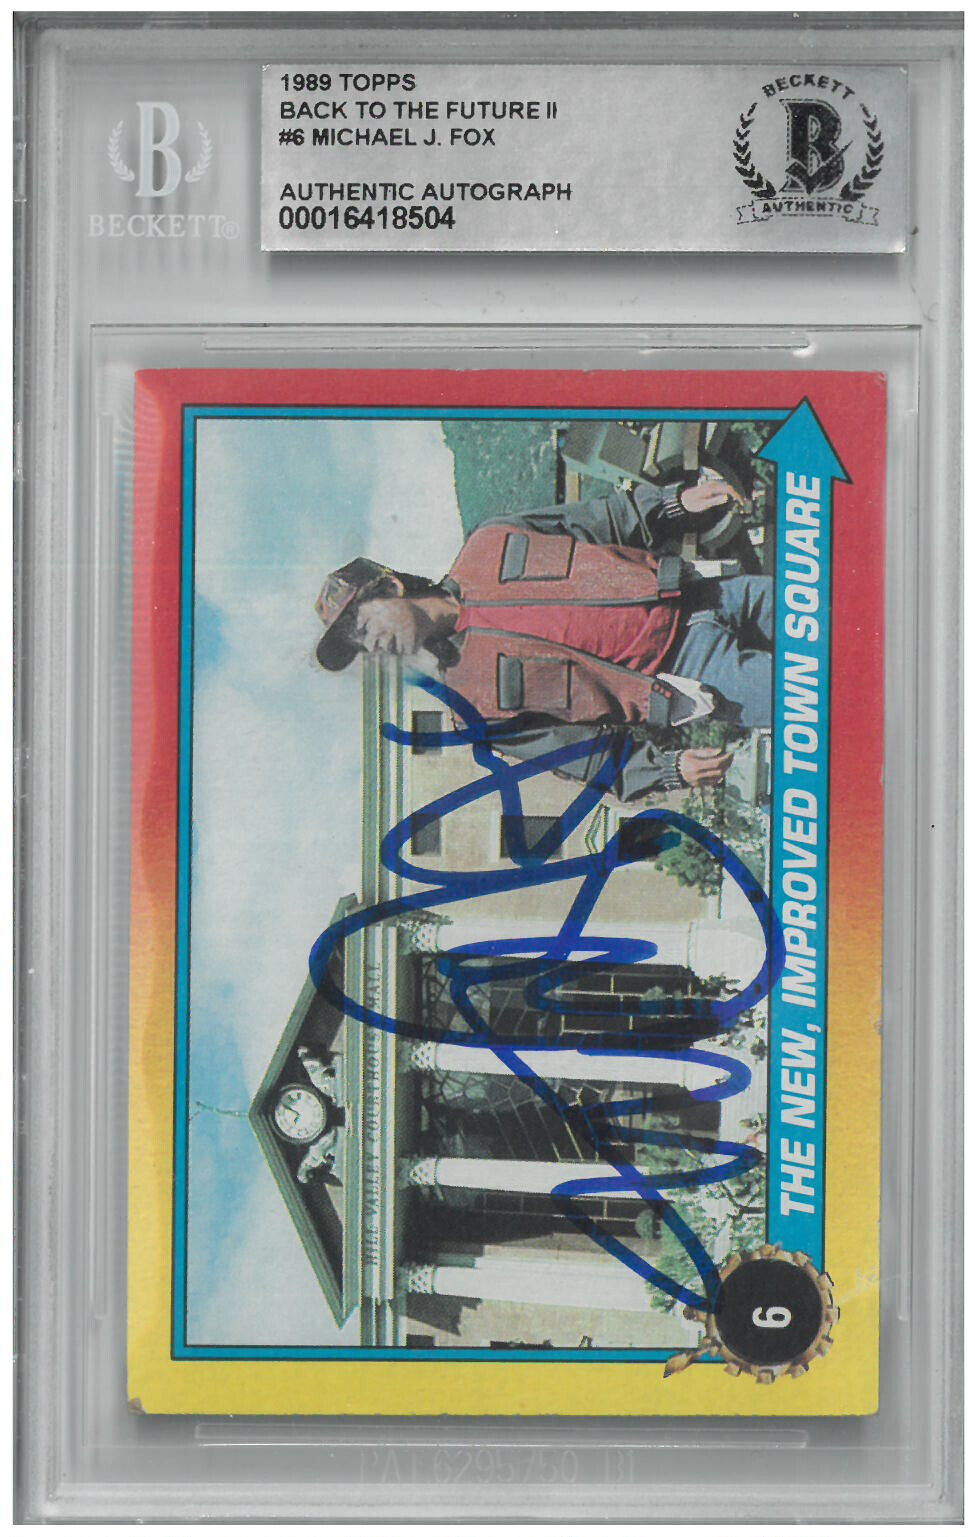 Michael J Fox Signed Autograph Slabbed Back To The Future II Topps Card Beckett